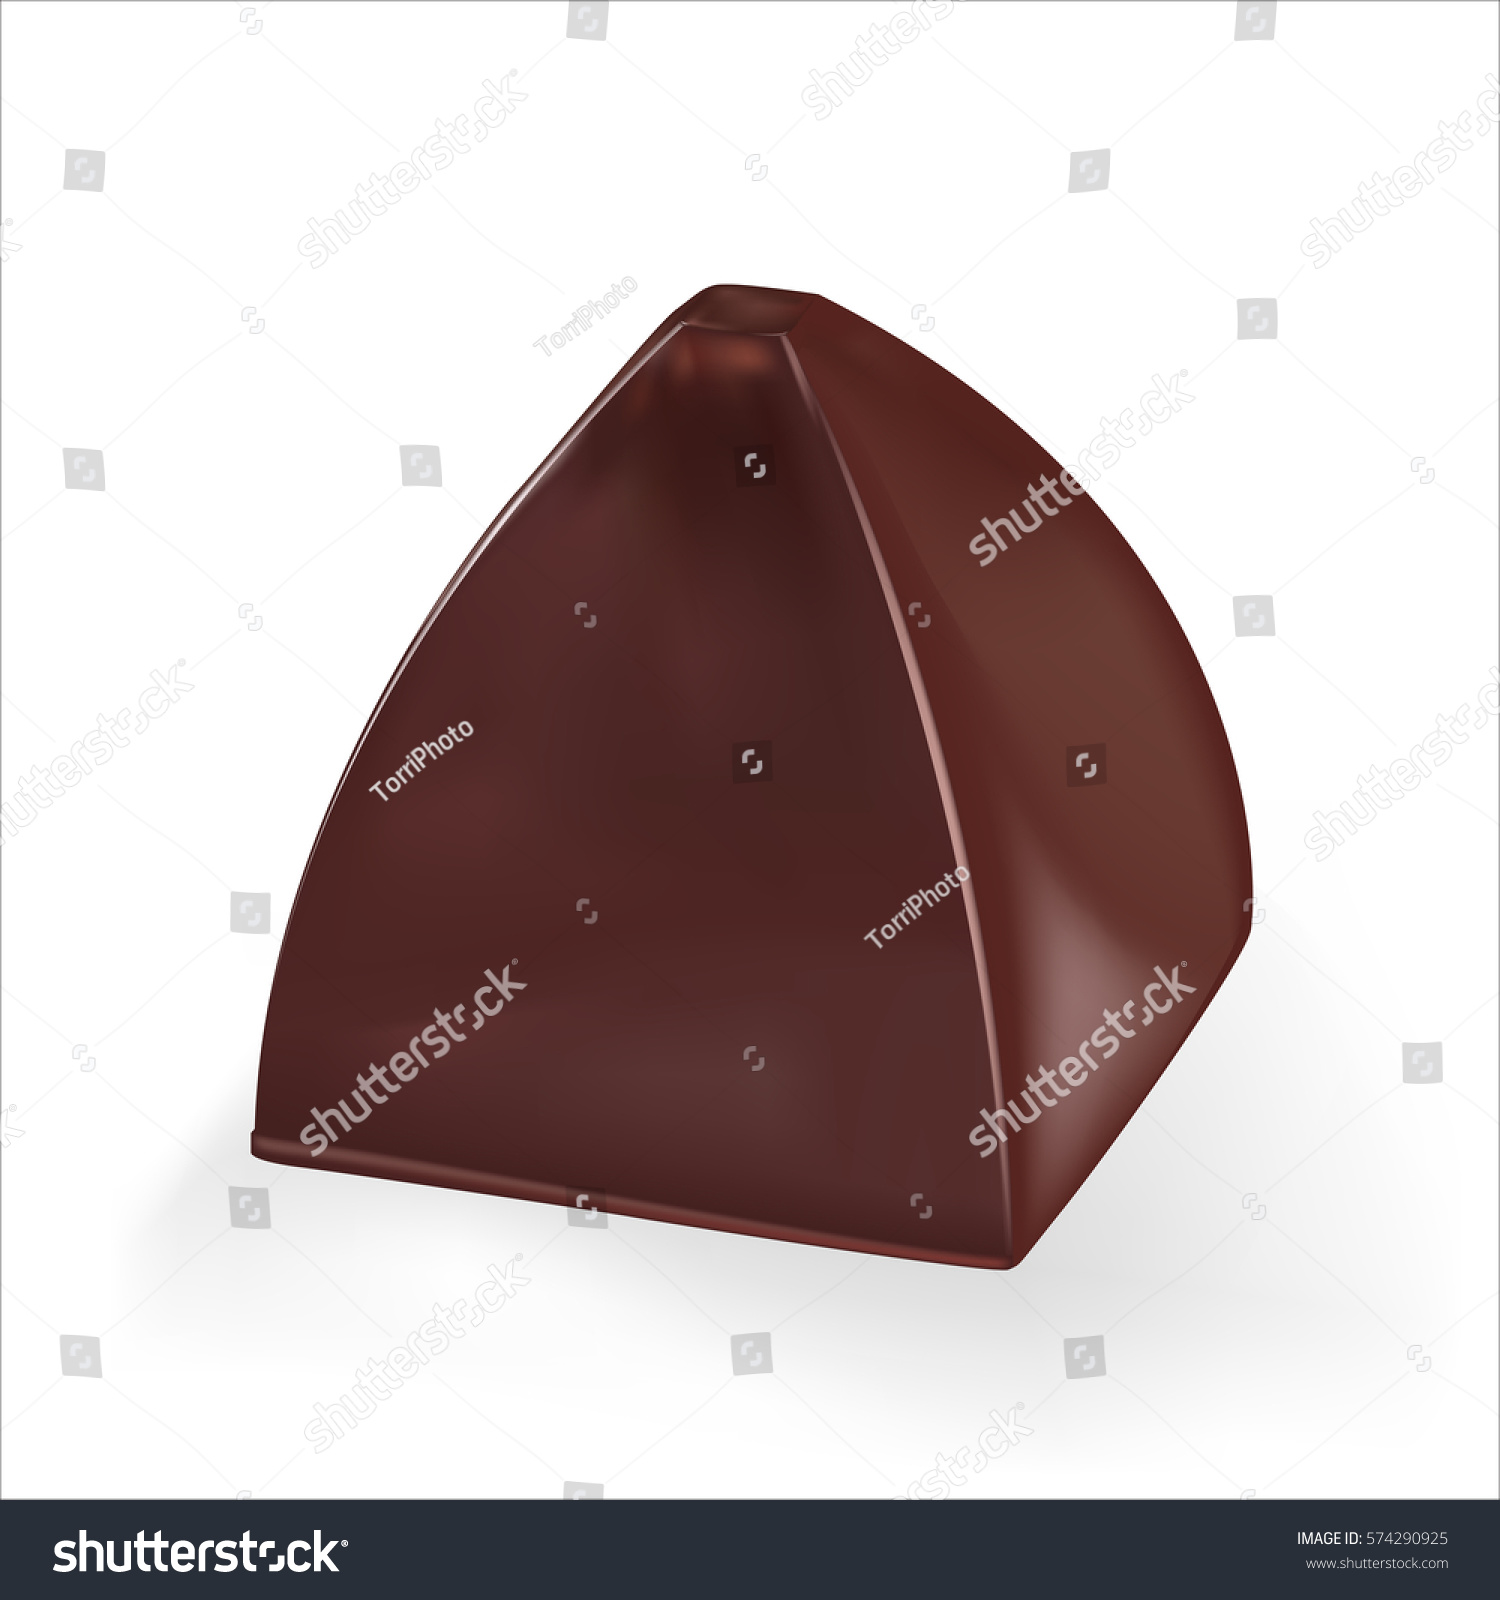 https://www.shutterstock.com/image-vector/pyramid-shape-chocolate-candy-vector-realistic-574290925